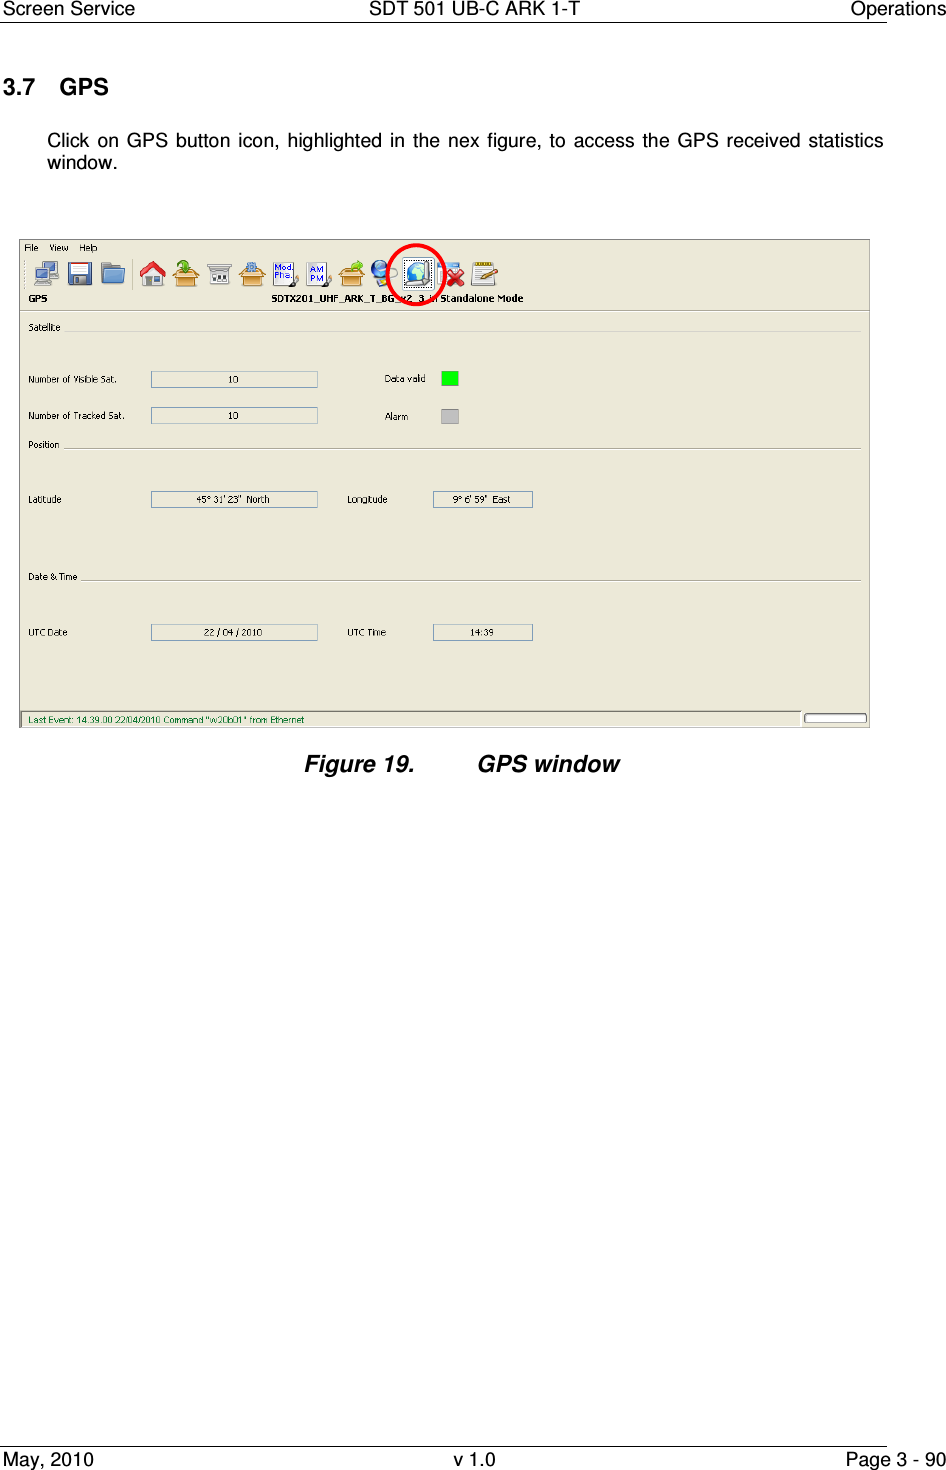 Screen Service  SDT 501 UB-C ARK 1-T  Operations May, 2010  v 1.0  Page 3 - 90 3.7  GPS  Click  on  GPS button  icon, highlighted  in  the  nex  figure, to  access  the  GPS  received  statistics window. Figure 19.  GPS window                                